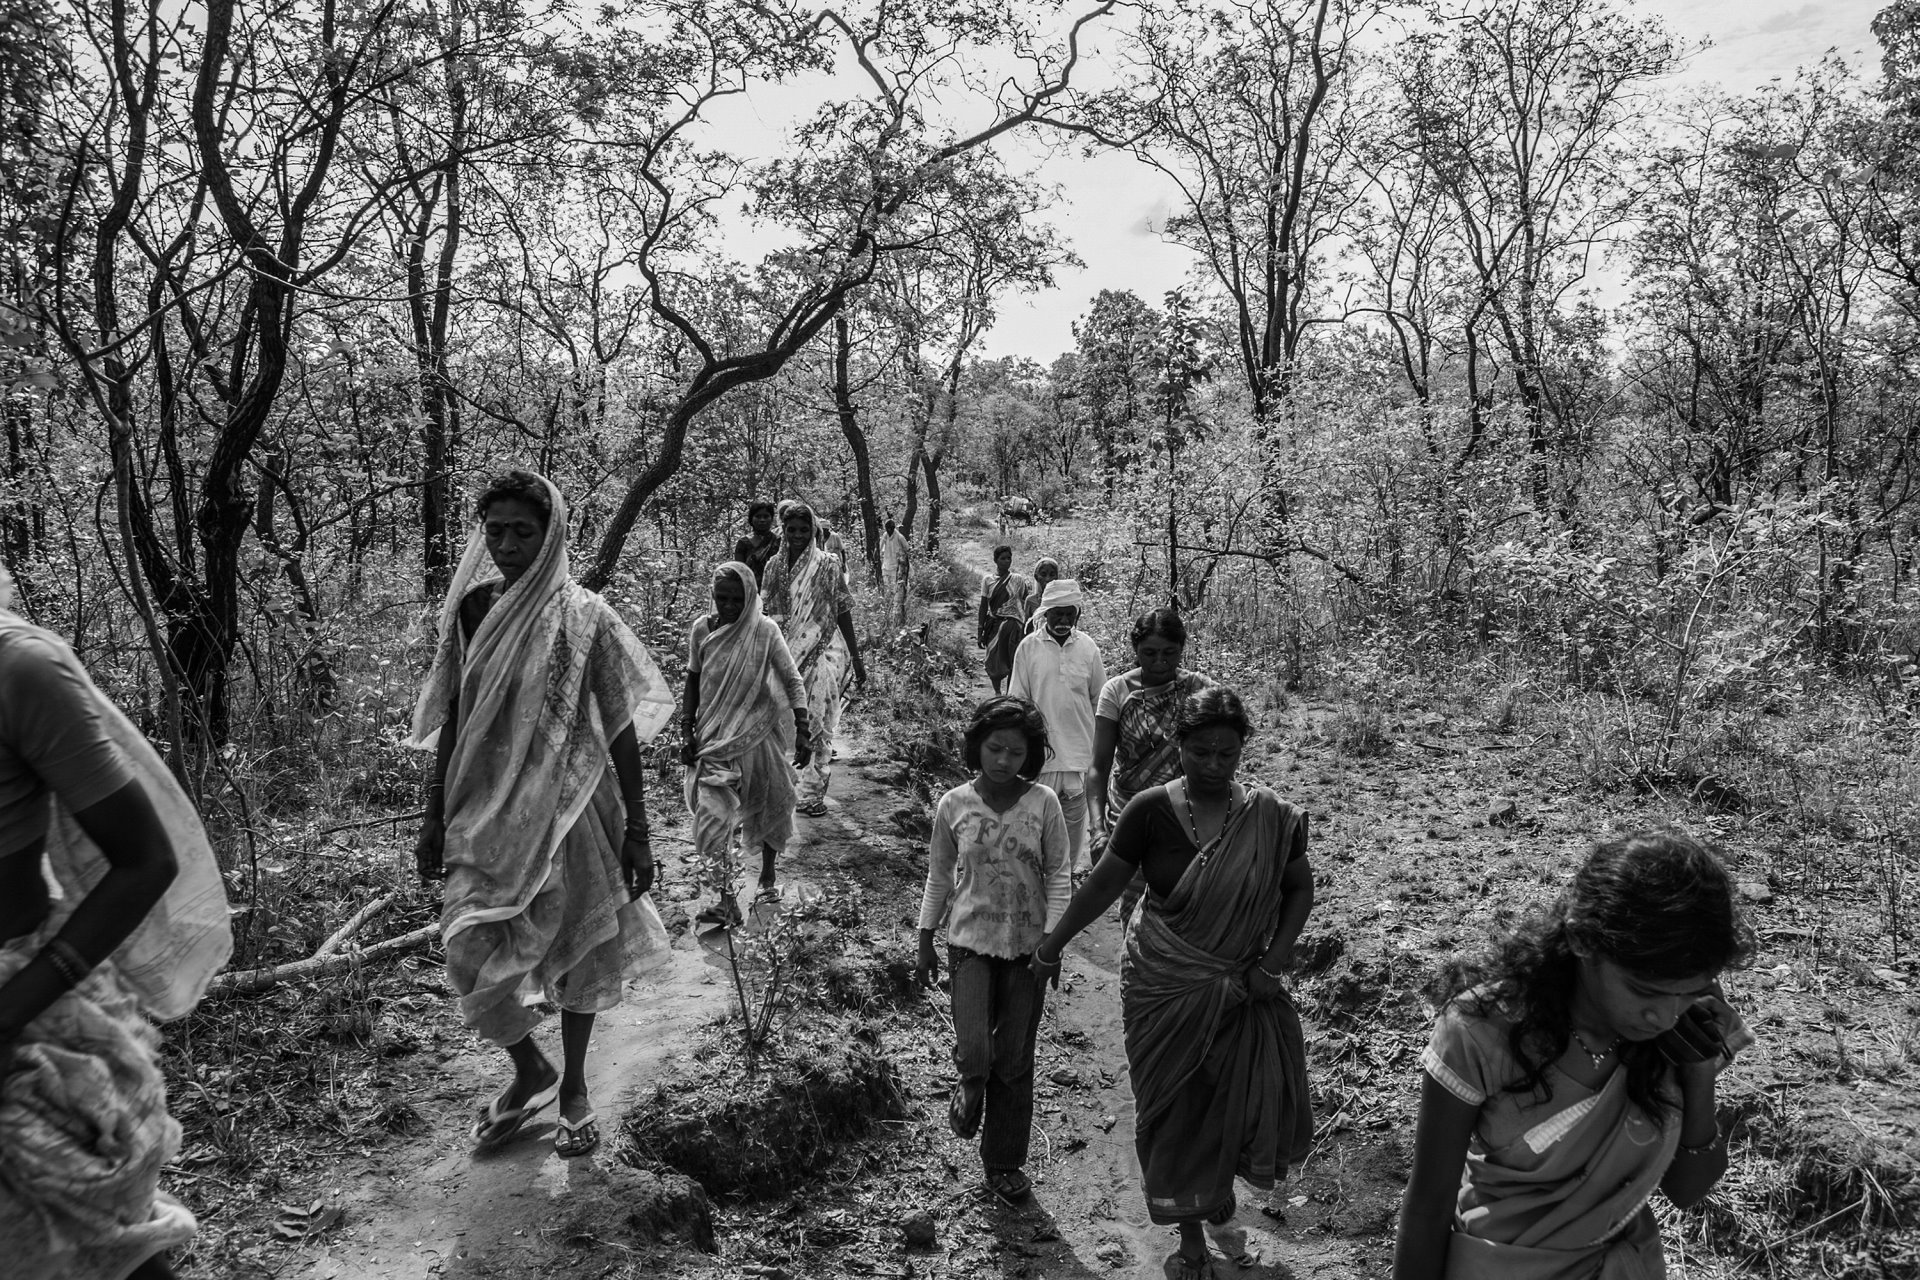 People walk through the forest zone in the Tadoba Andhari Tiger Reserve, near the village of Navegaon, in Maharashtra, India, to attend a funeral.